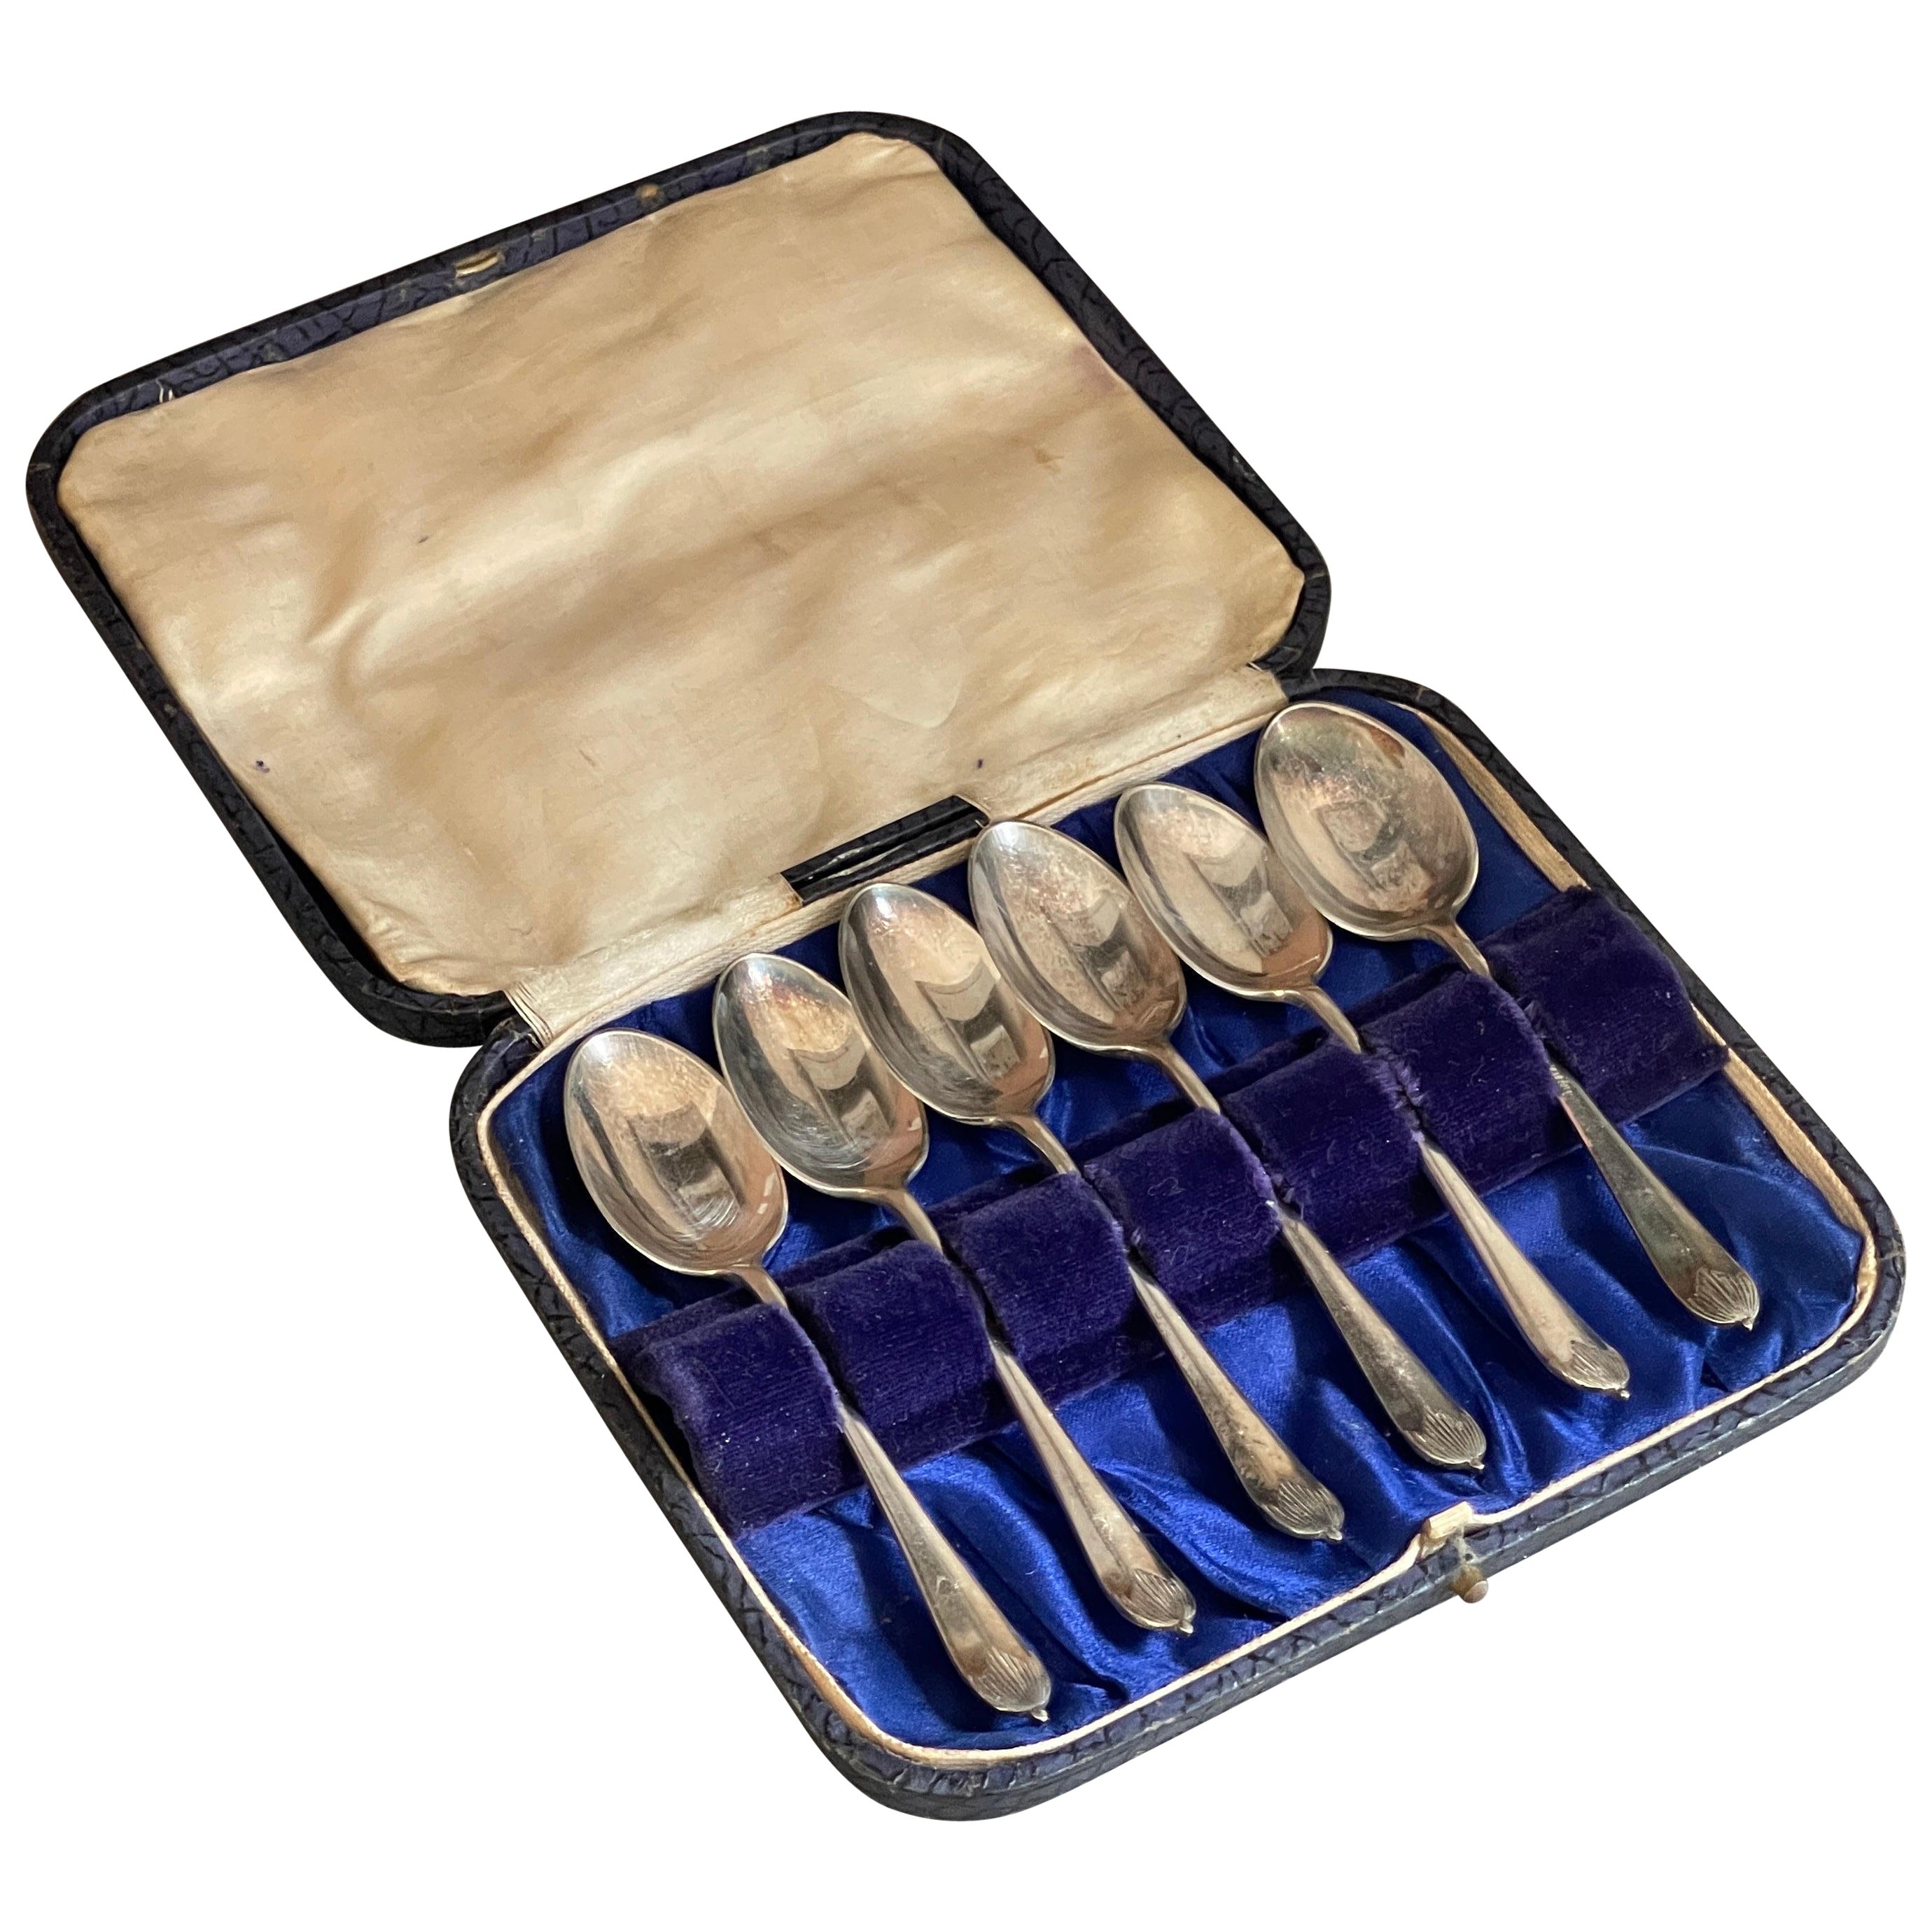 Exclusive Tea COFFEE SPOONS, 6 pcs. Sterling Silver & Box, Antique Silver Spoons For Sale